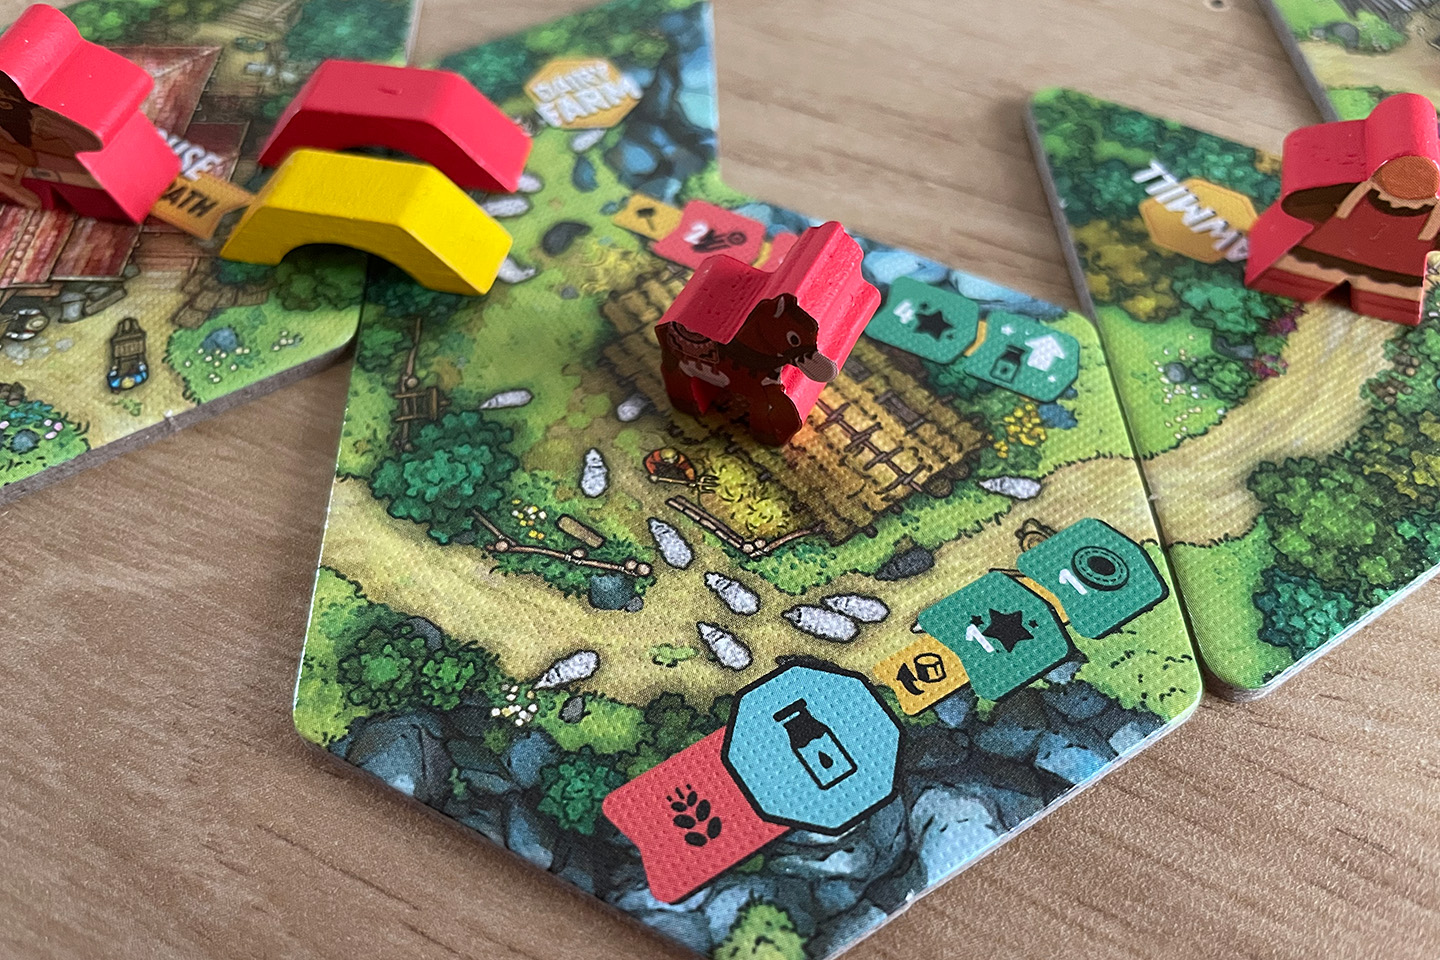 The dairy farm lets you turn wheat into milk. I suppose there's a cow involved in the process. Also note how both players have built a road to the Warehouse in the top left.